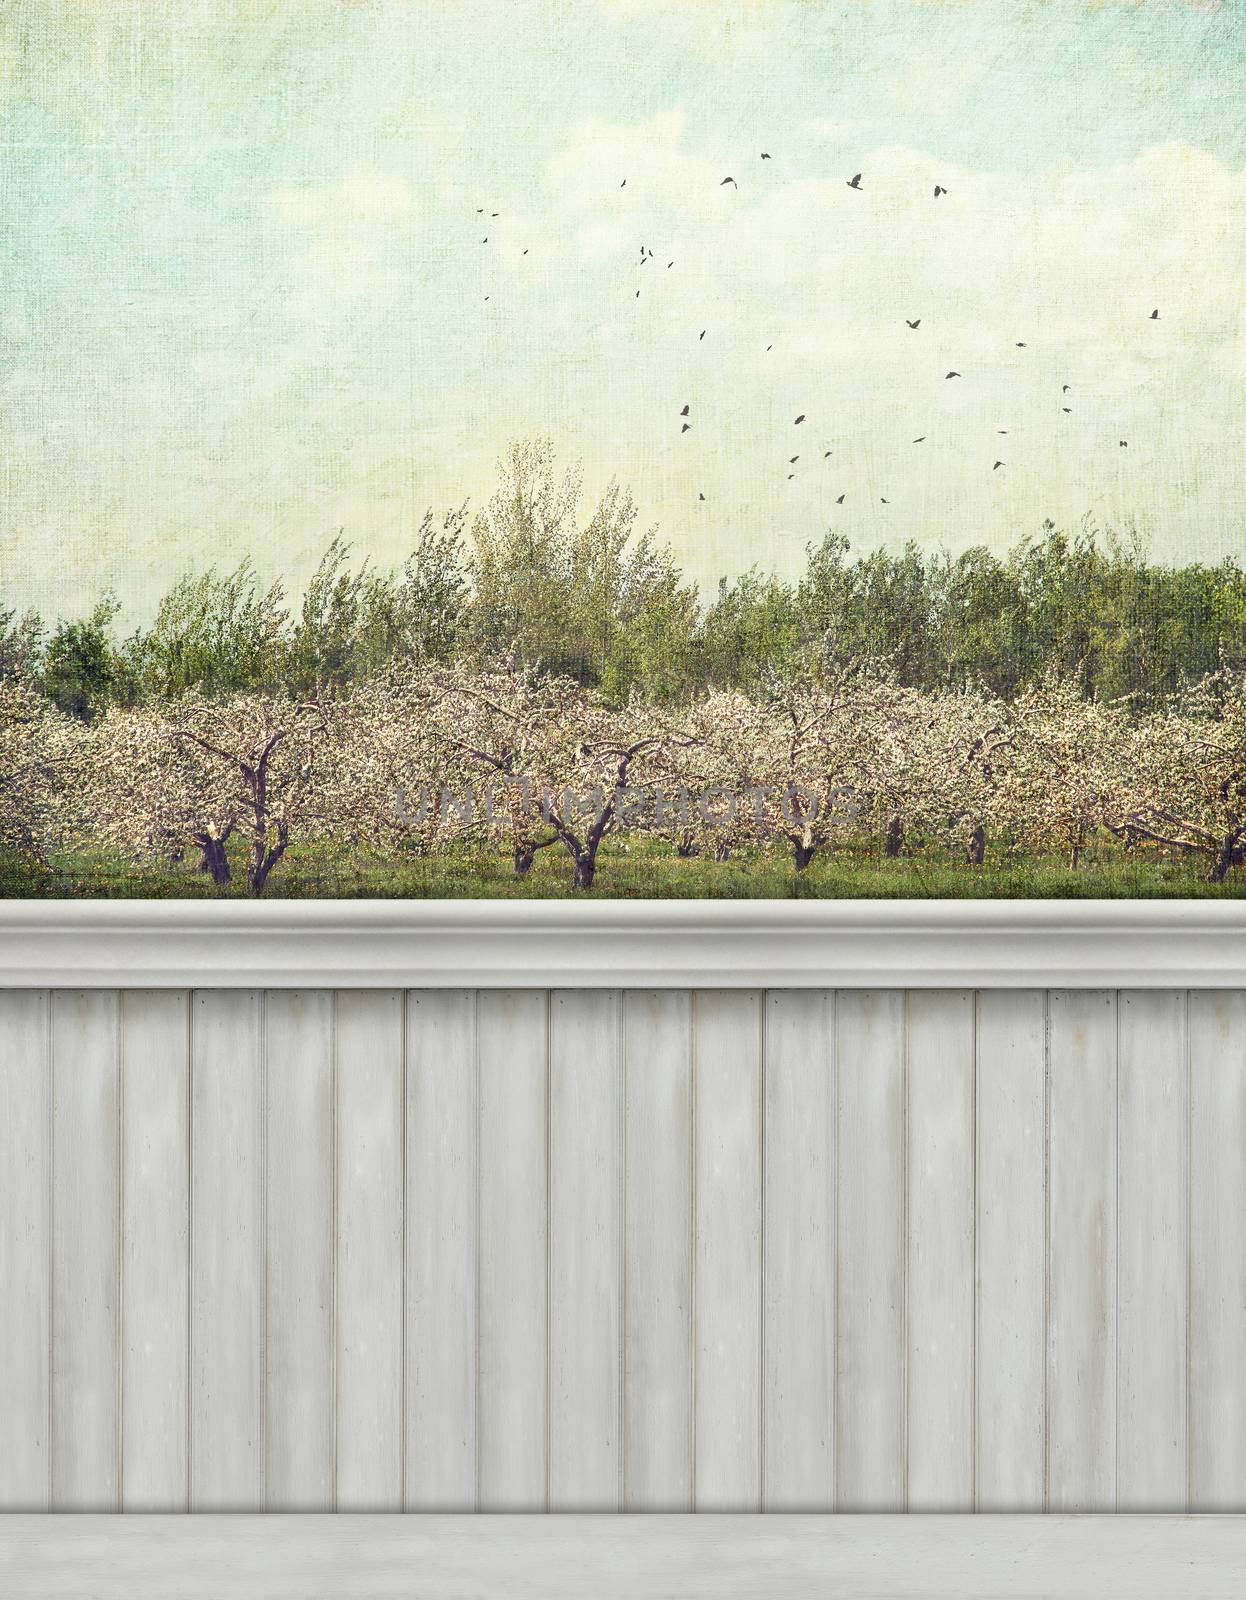  Spring wall background/backdrop by Sandralise